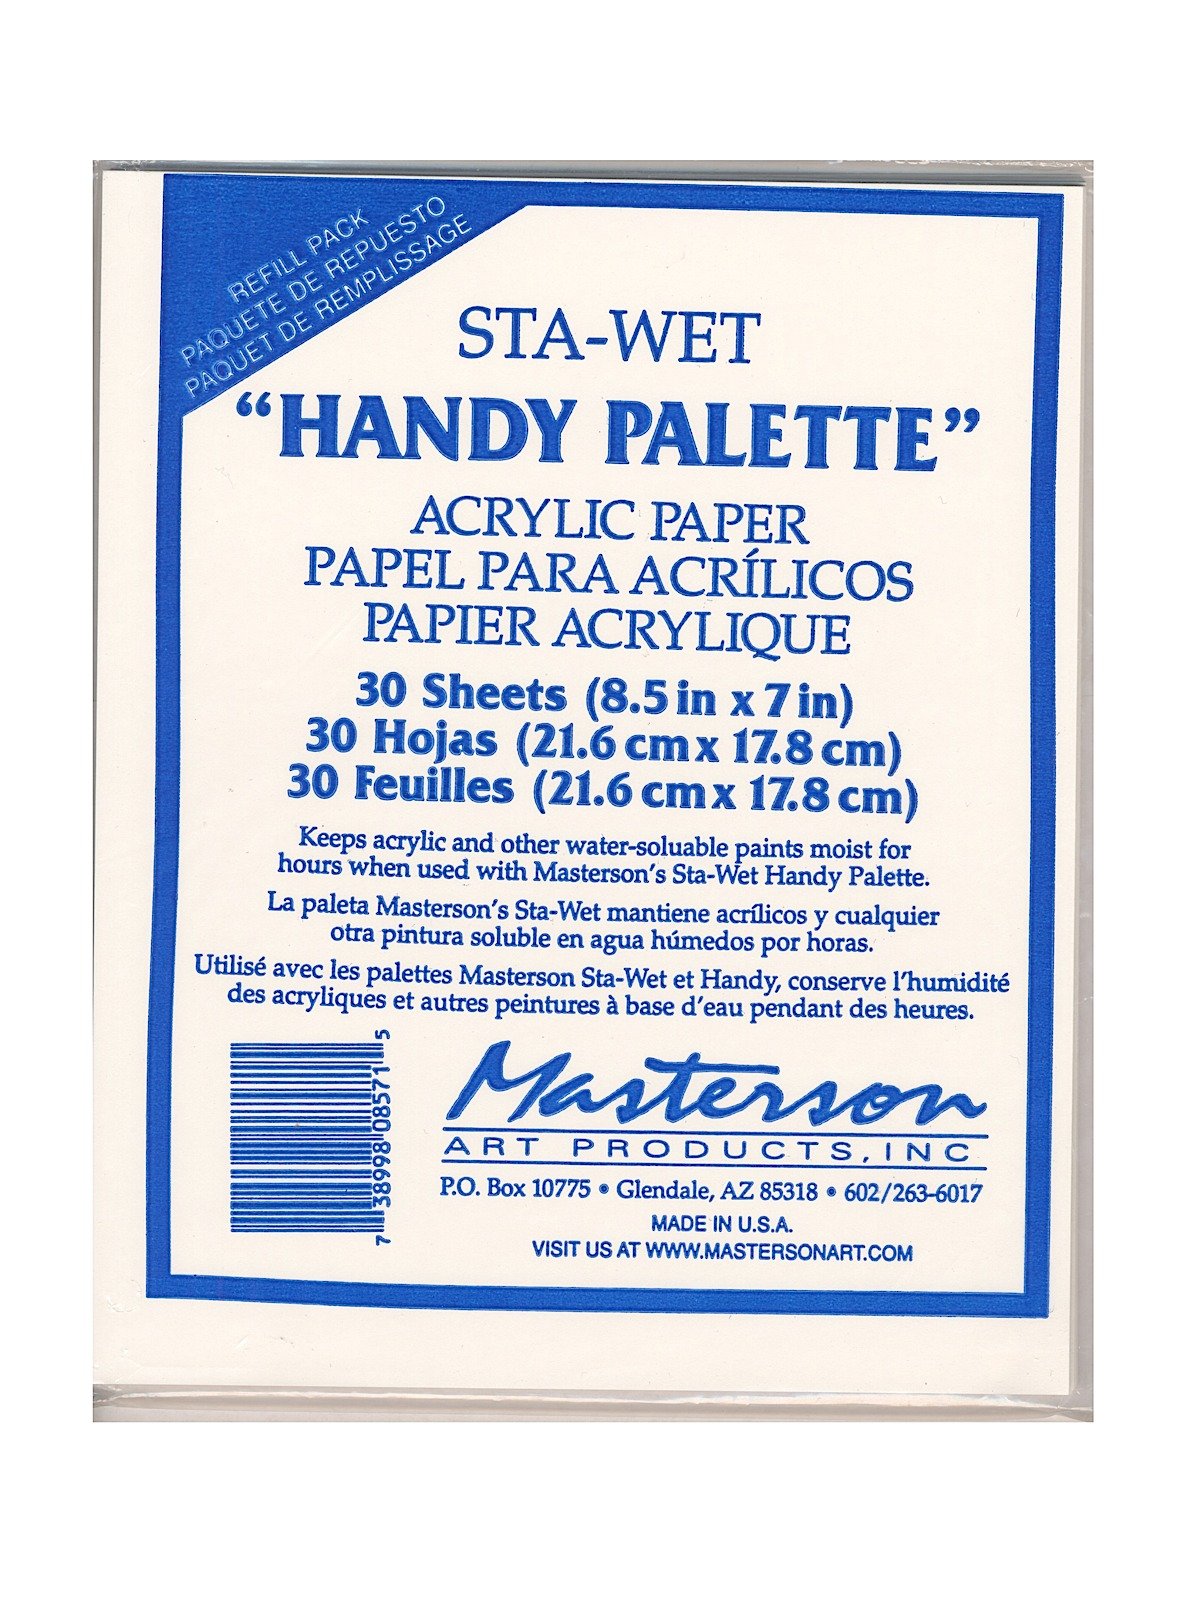 Handy Palette by Masterson Art Procucts - Brushes and More